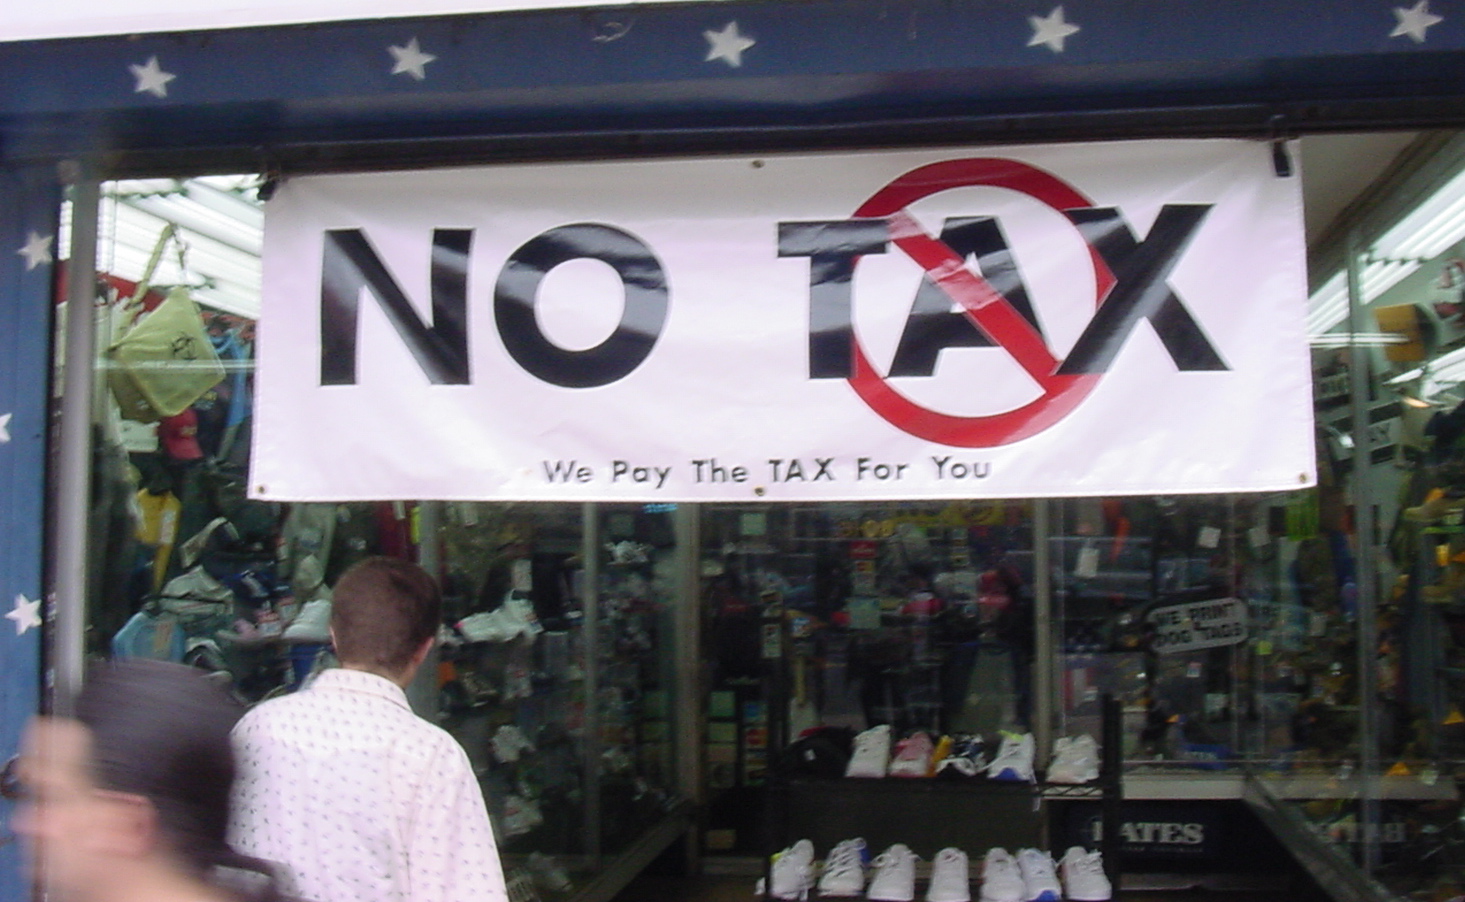 there is no tax sign in the window